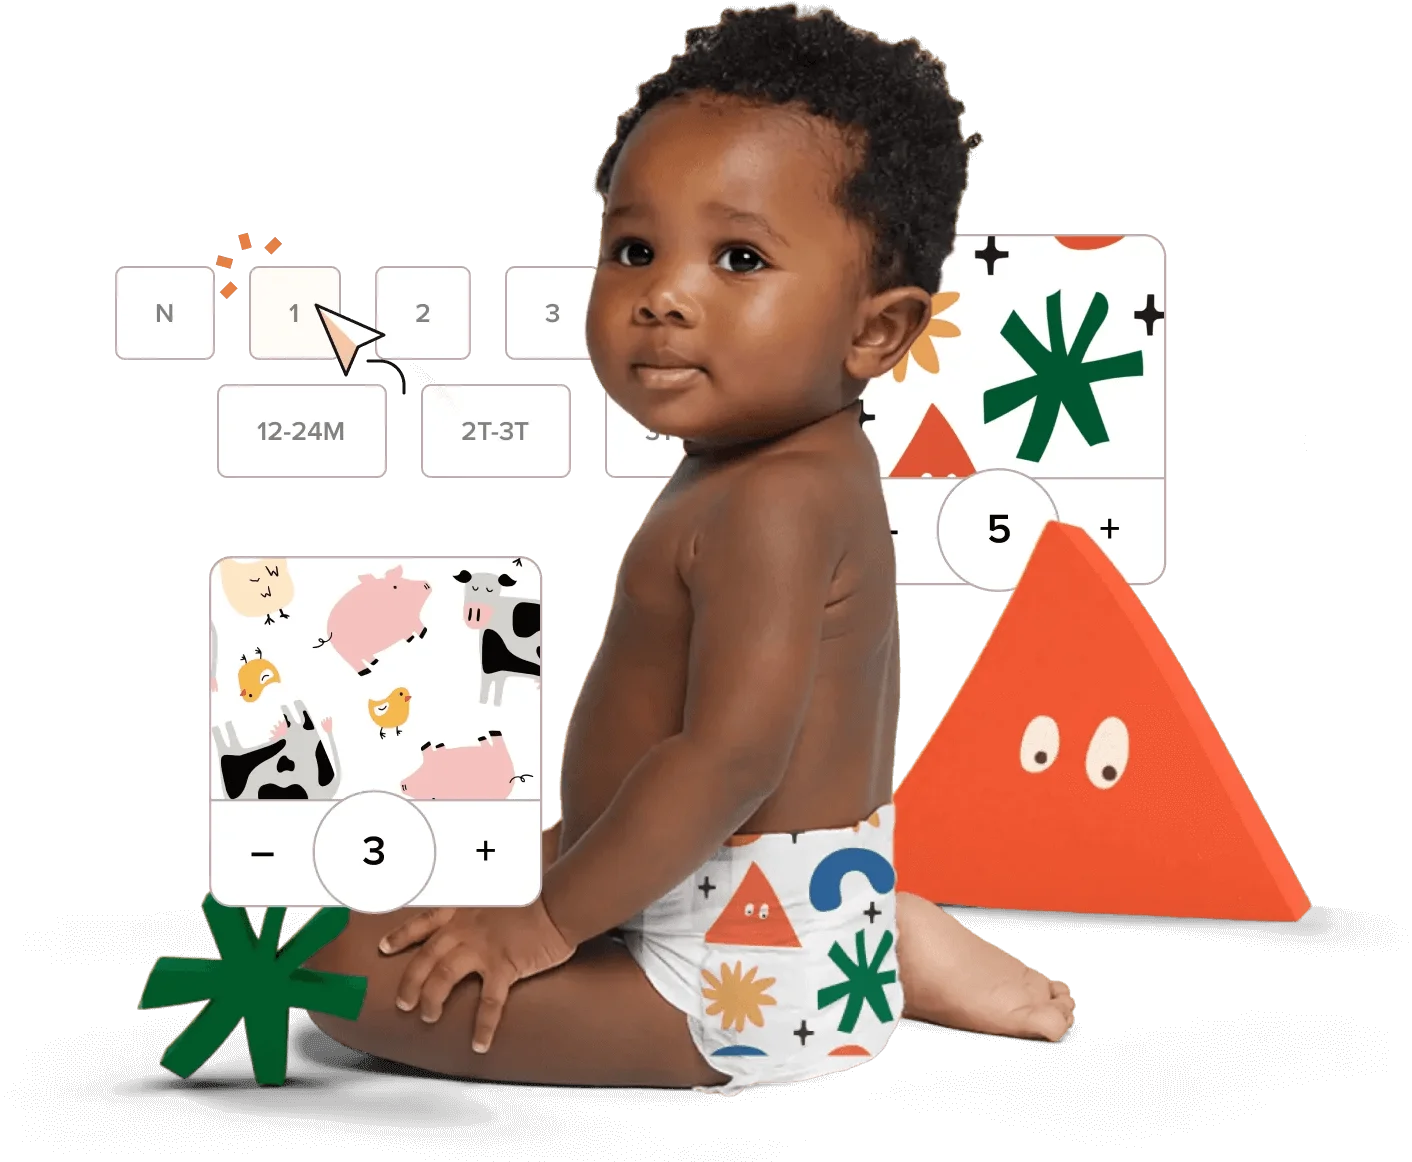 Image of a baby in a diaper surrounded by cartoon graphics of a subscription purchase interface